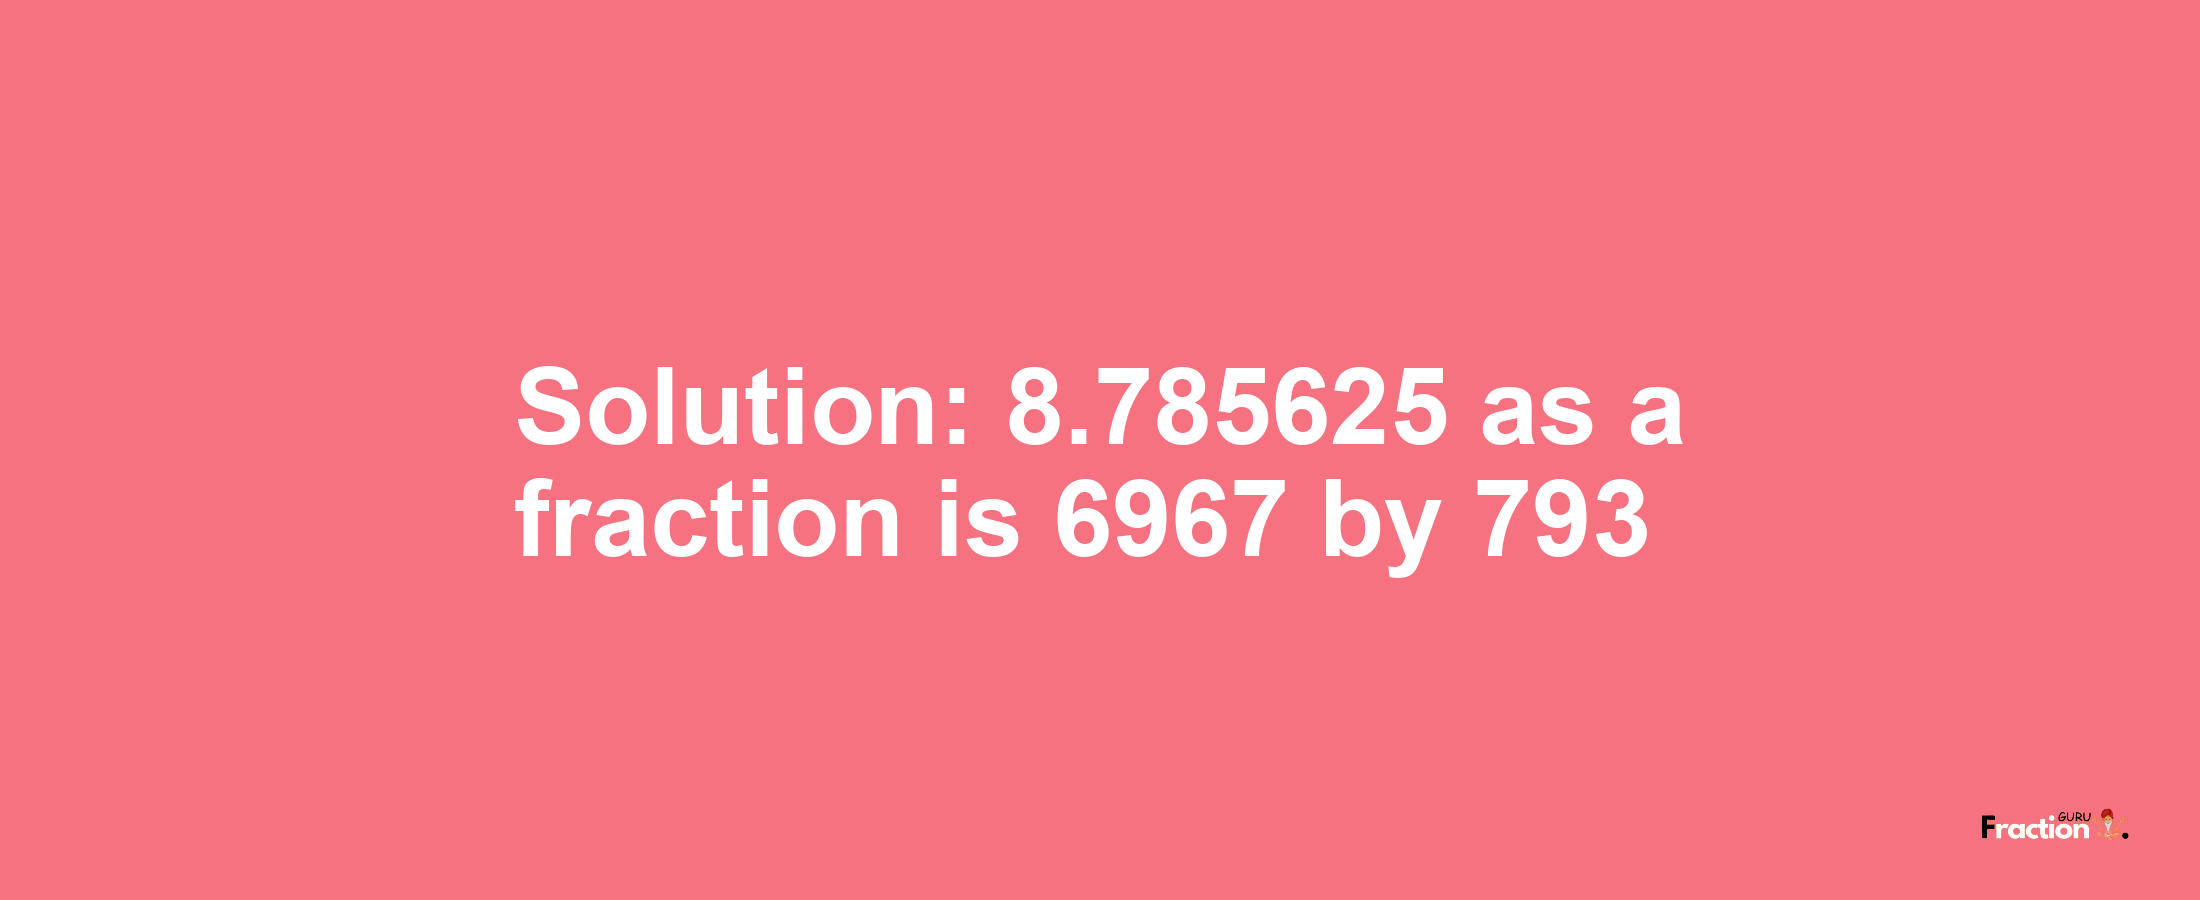 Solution:8.785625 as a fraction is 6967/793